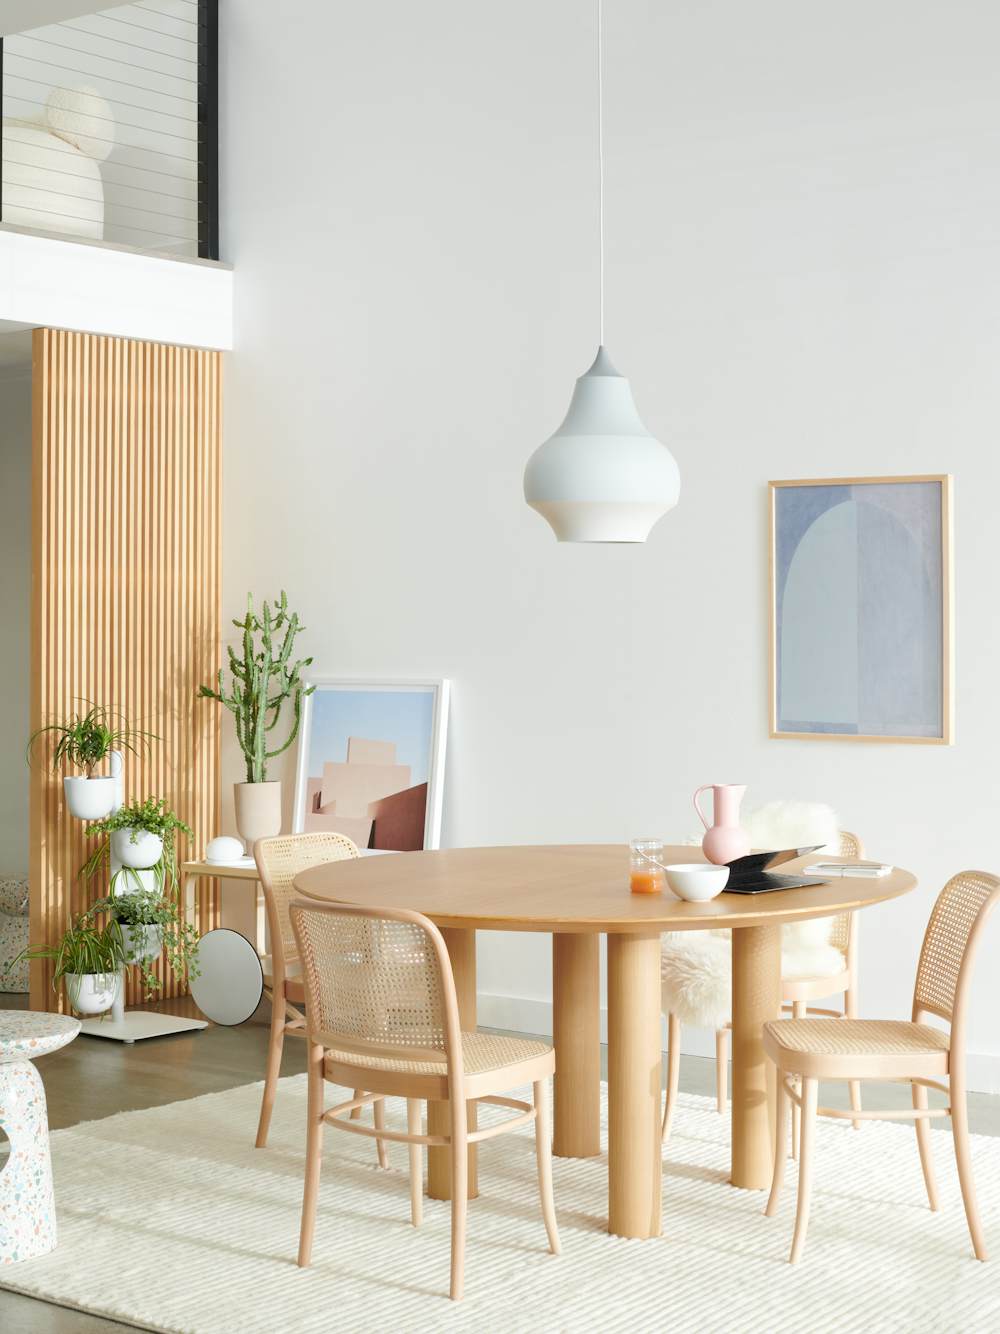 Earth Table, Hoffman Dining Chair and Cirque Pendant